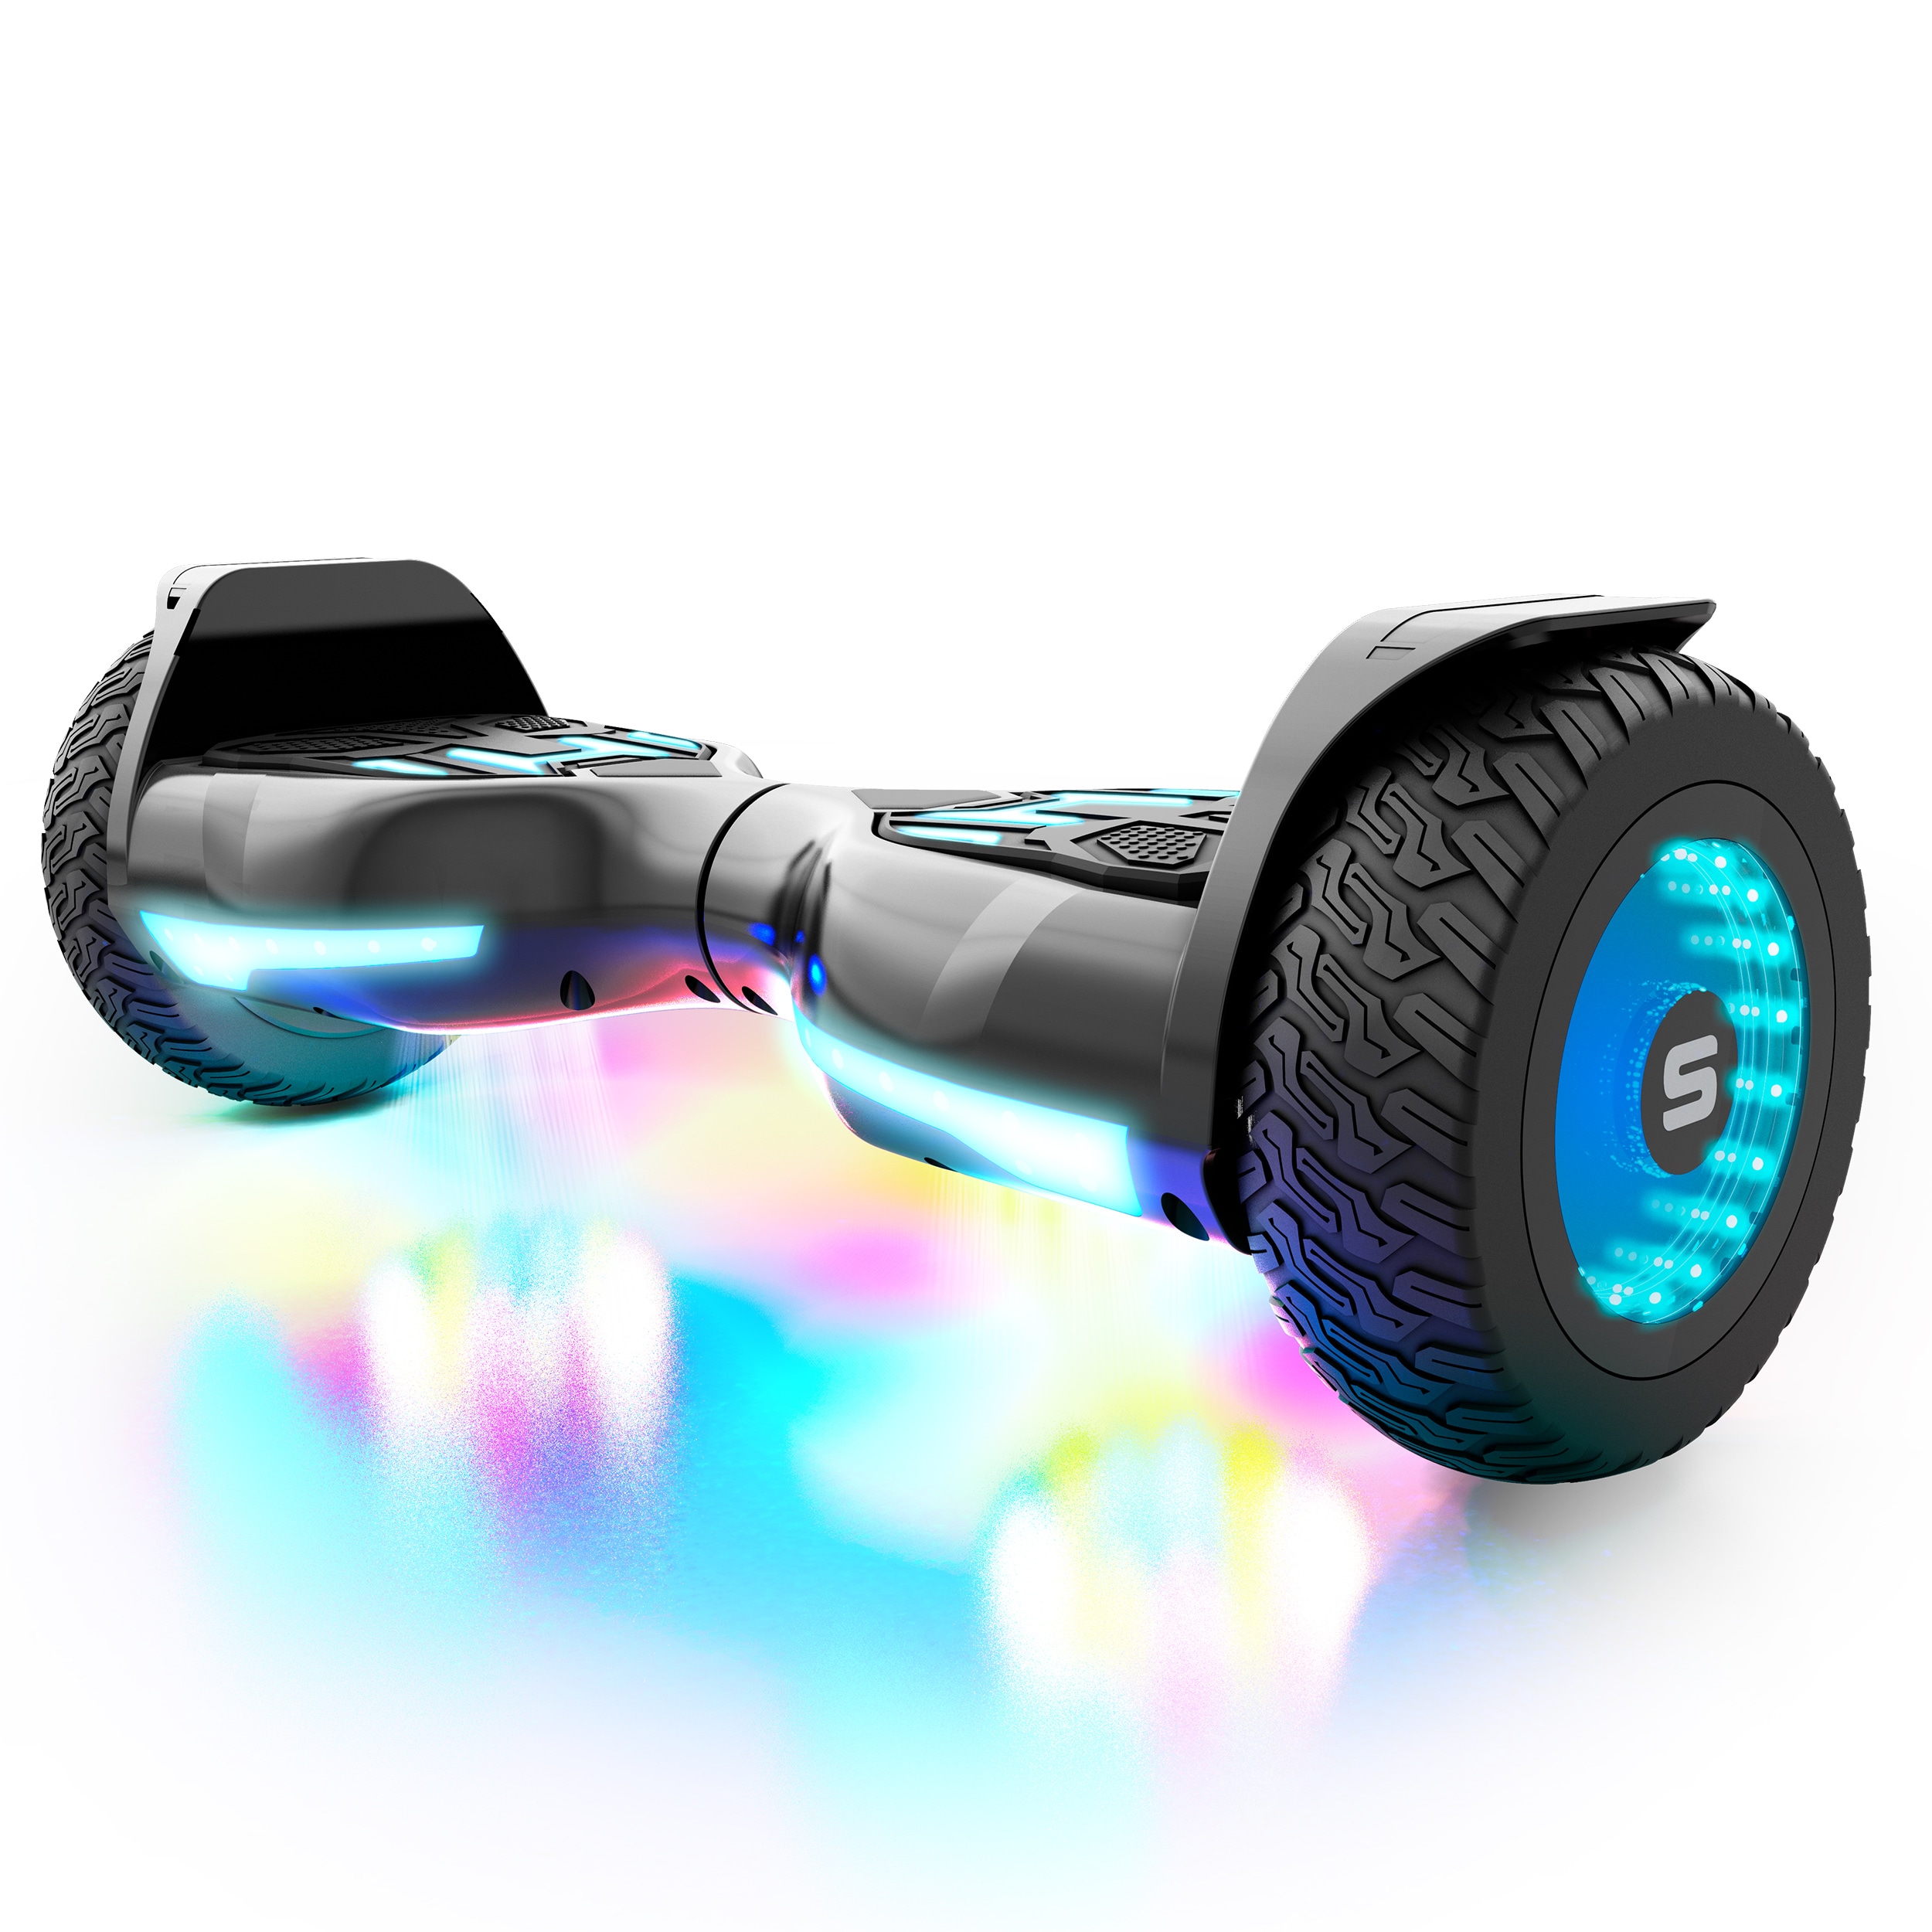 What Type of Pump Works on My SWAGTRON Hoverboard, Electric Bike